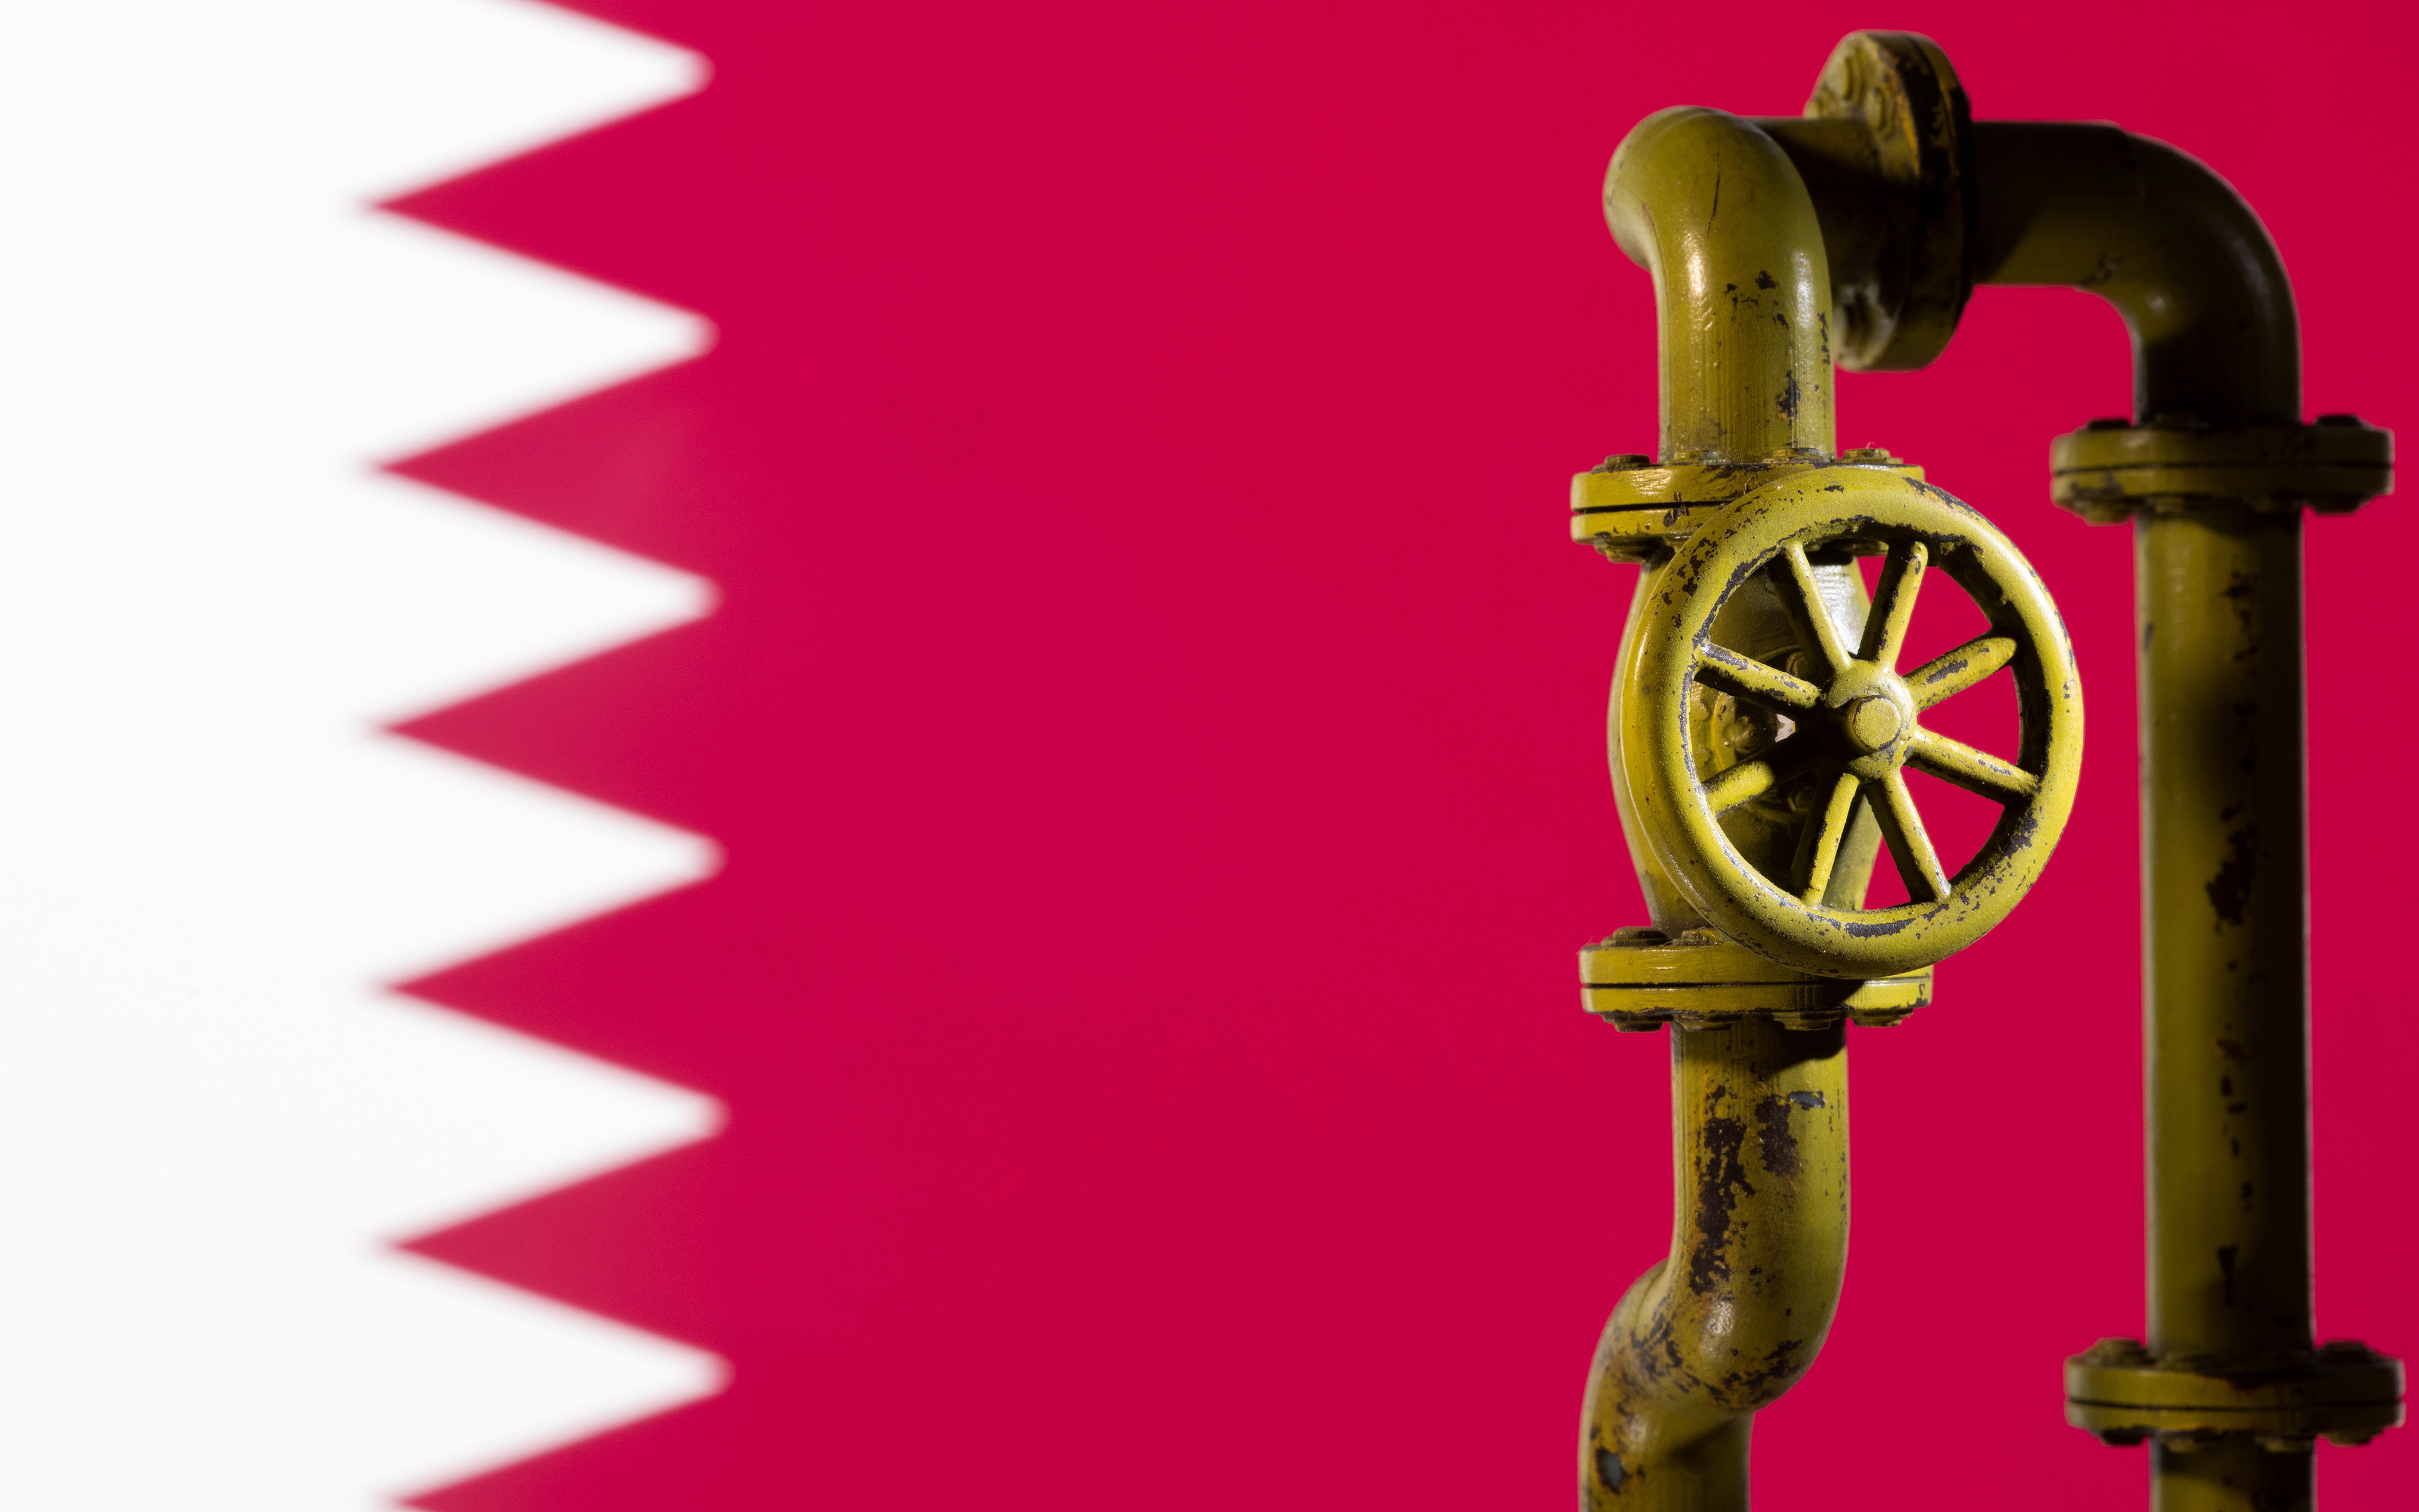 Illustration shows Qatar flag and natural gas pipeline